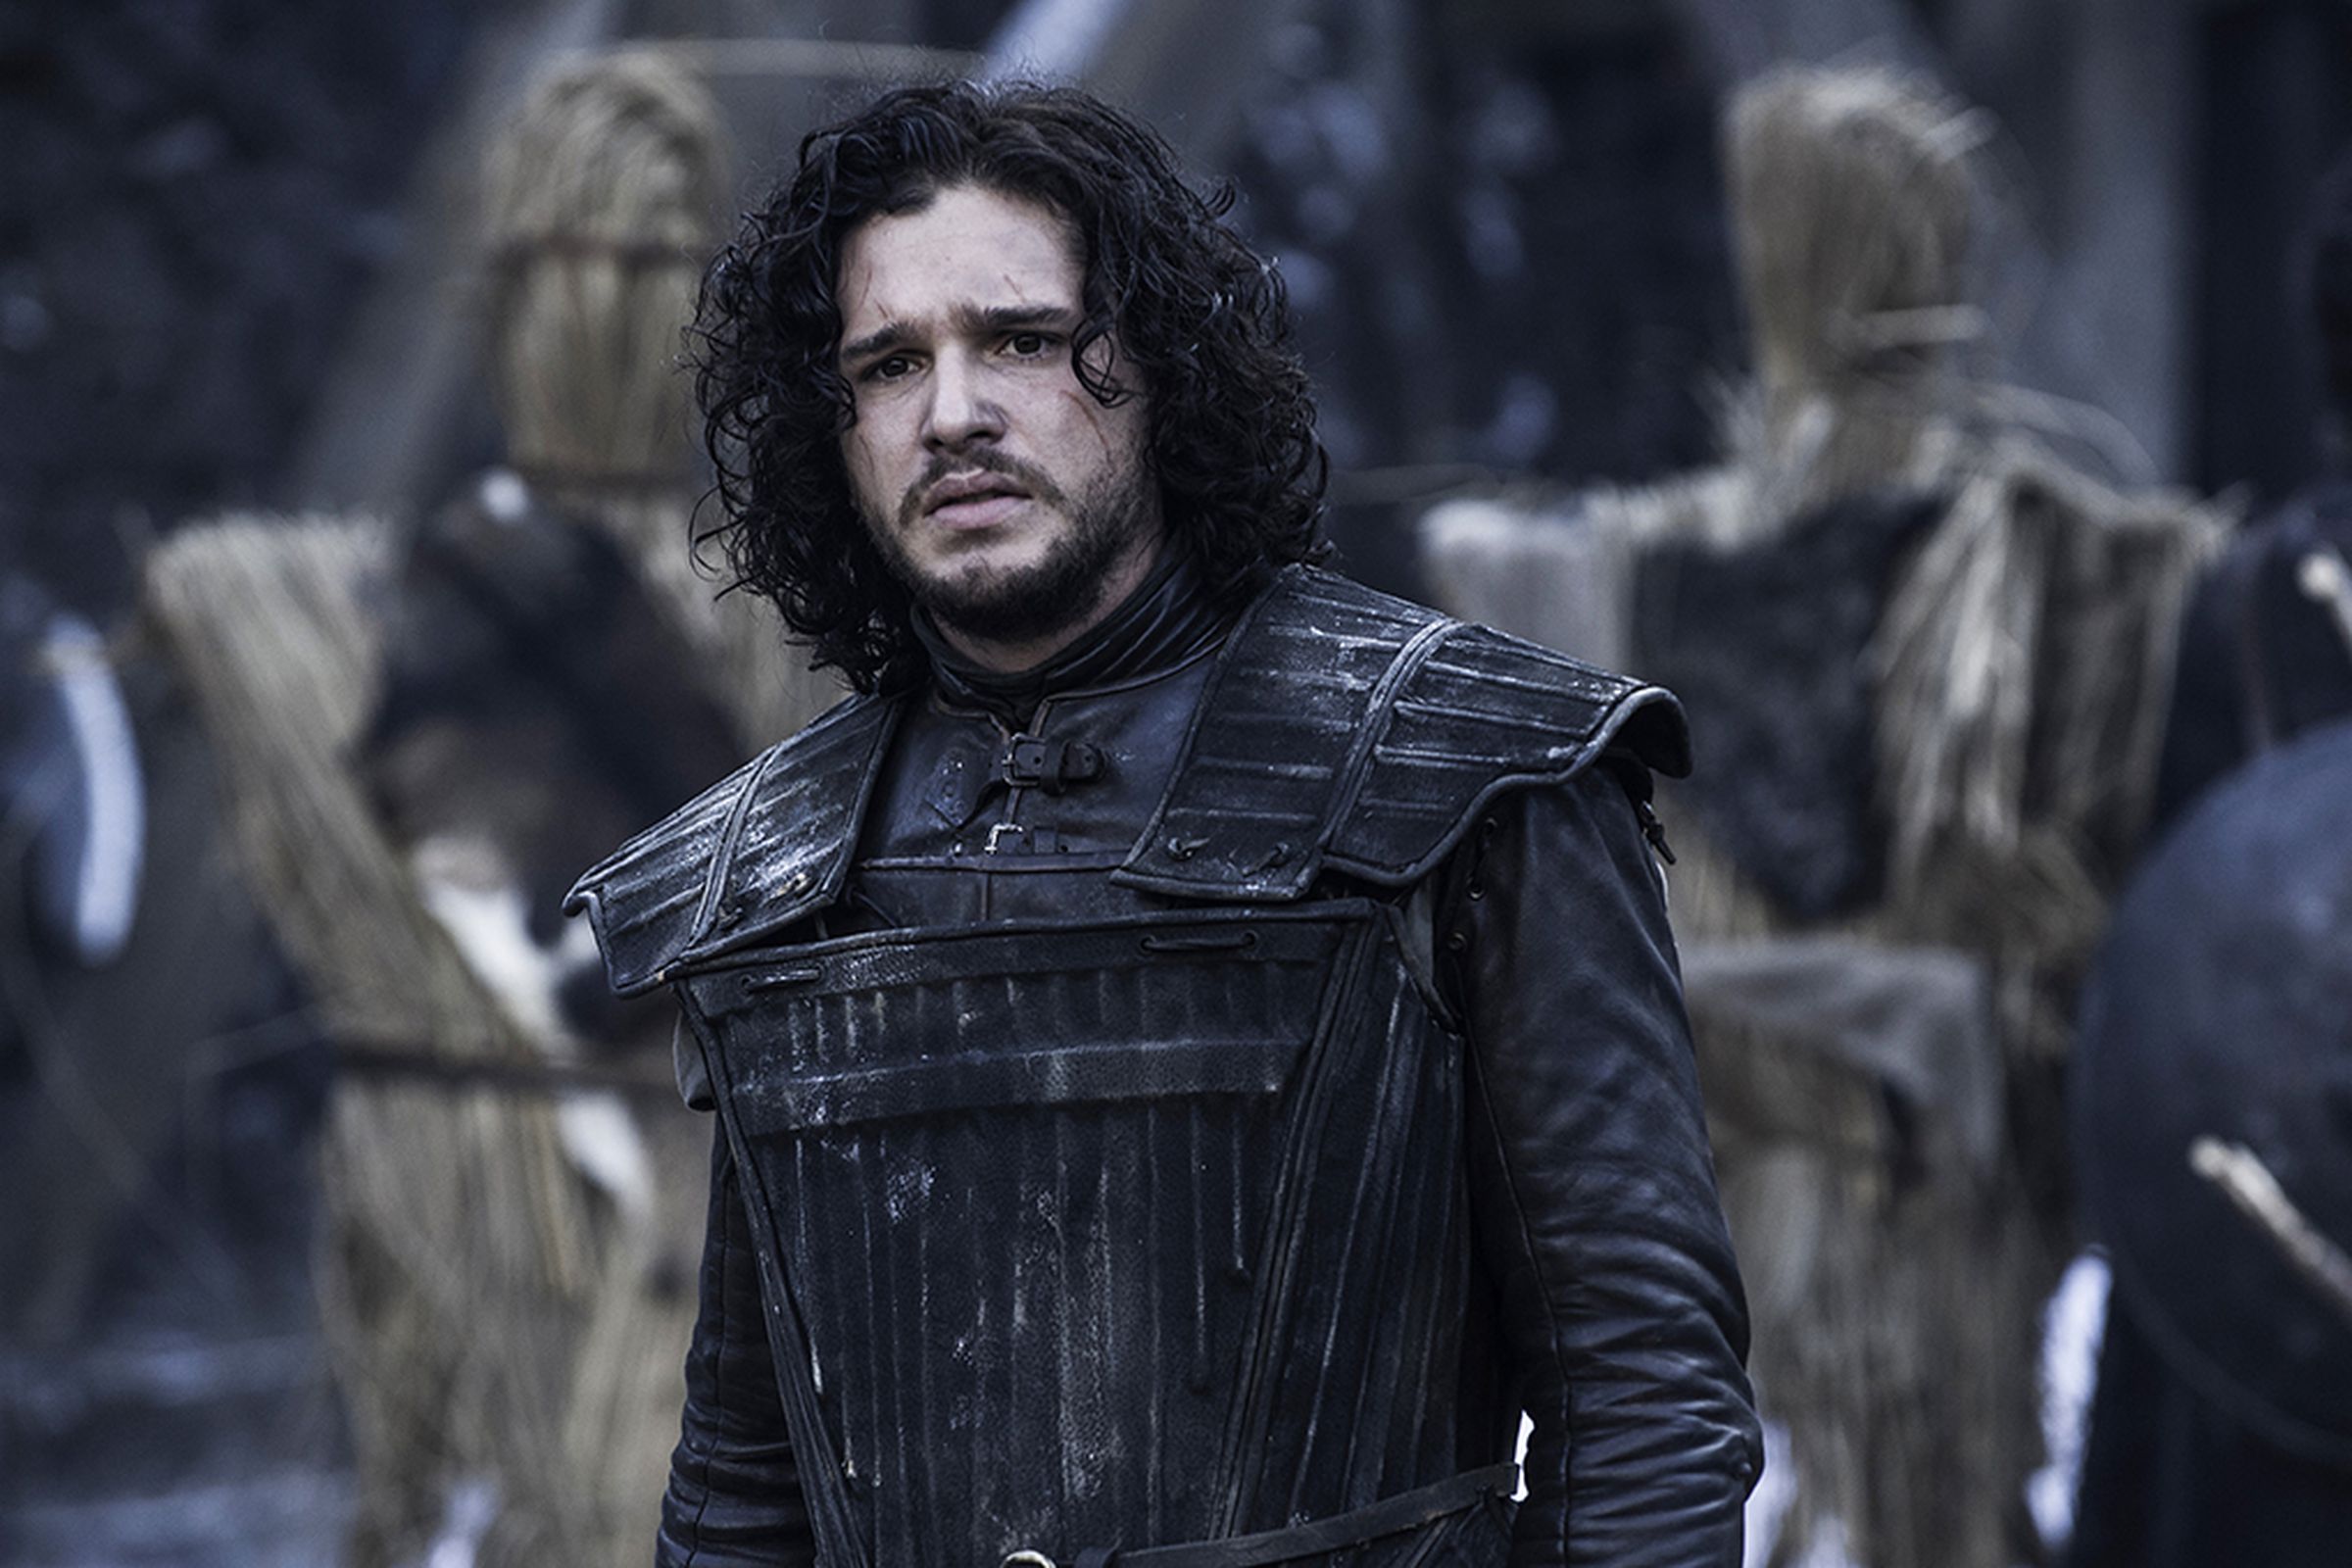 Game of Thrones Season 4 promotional images (HBO)